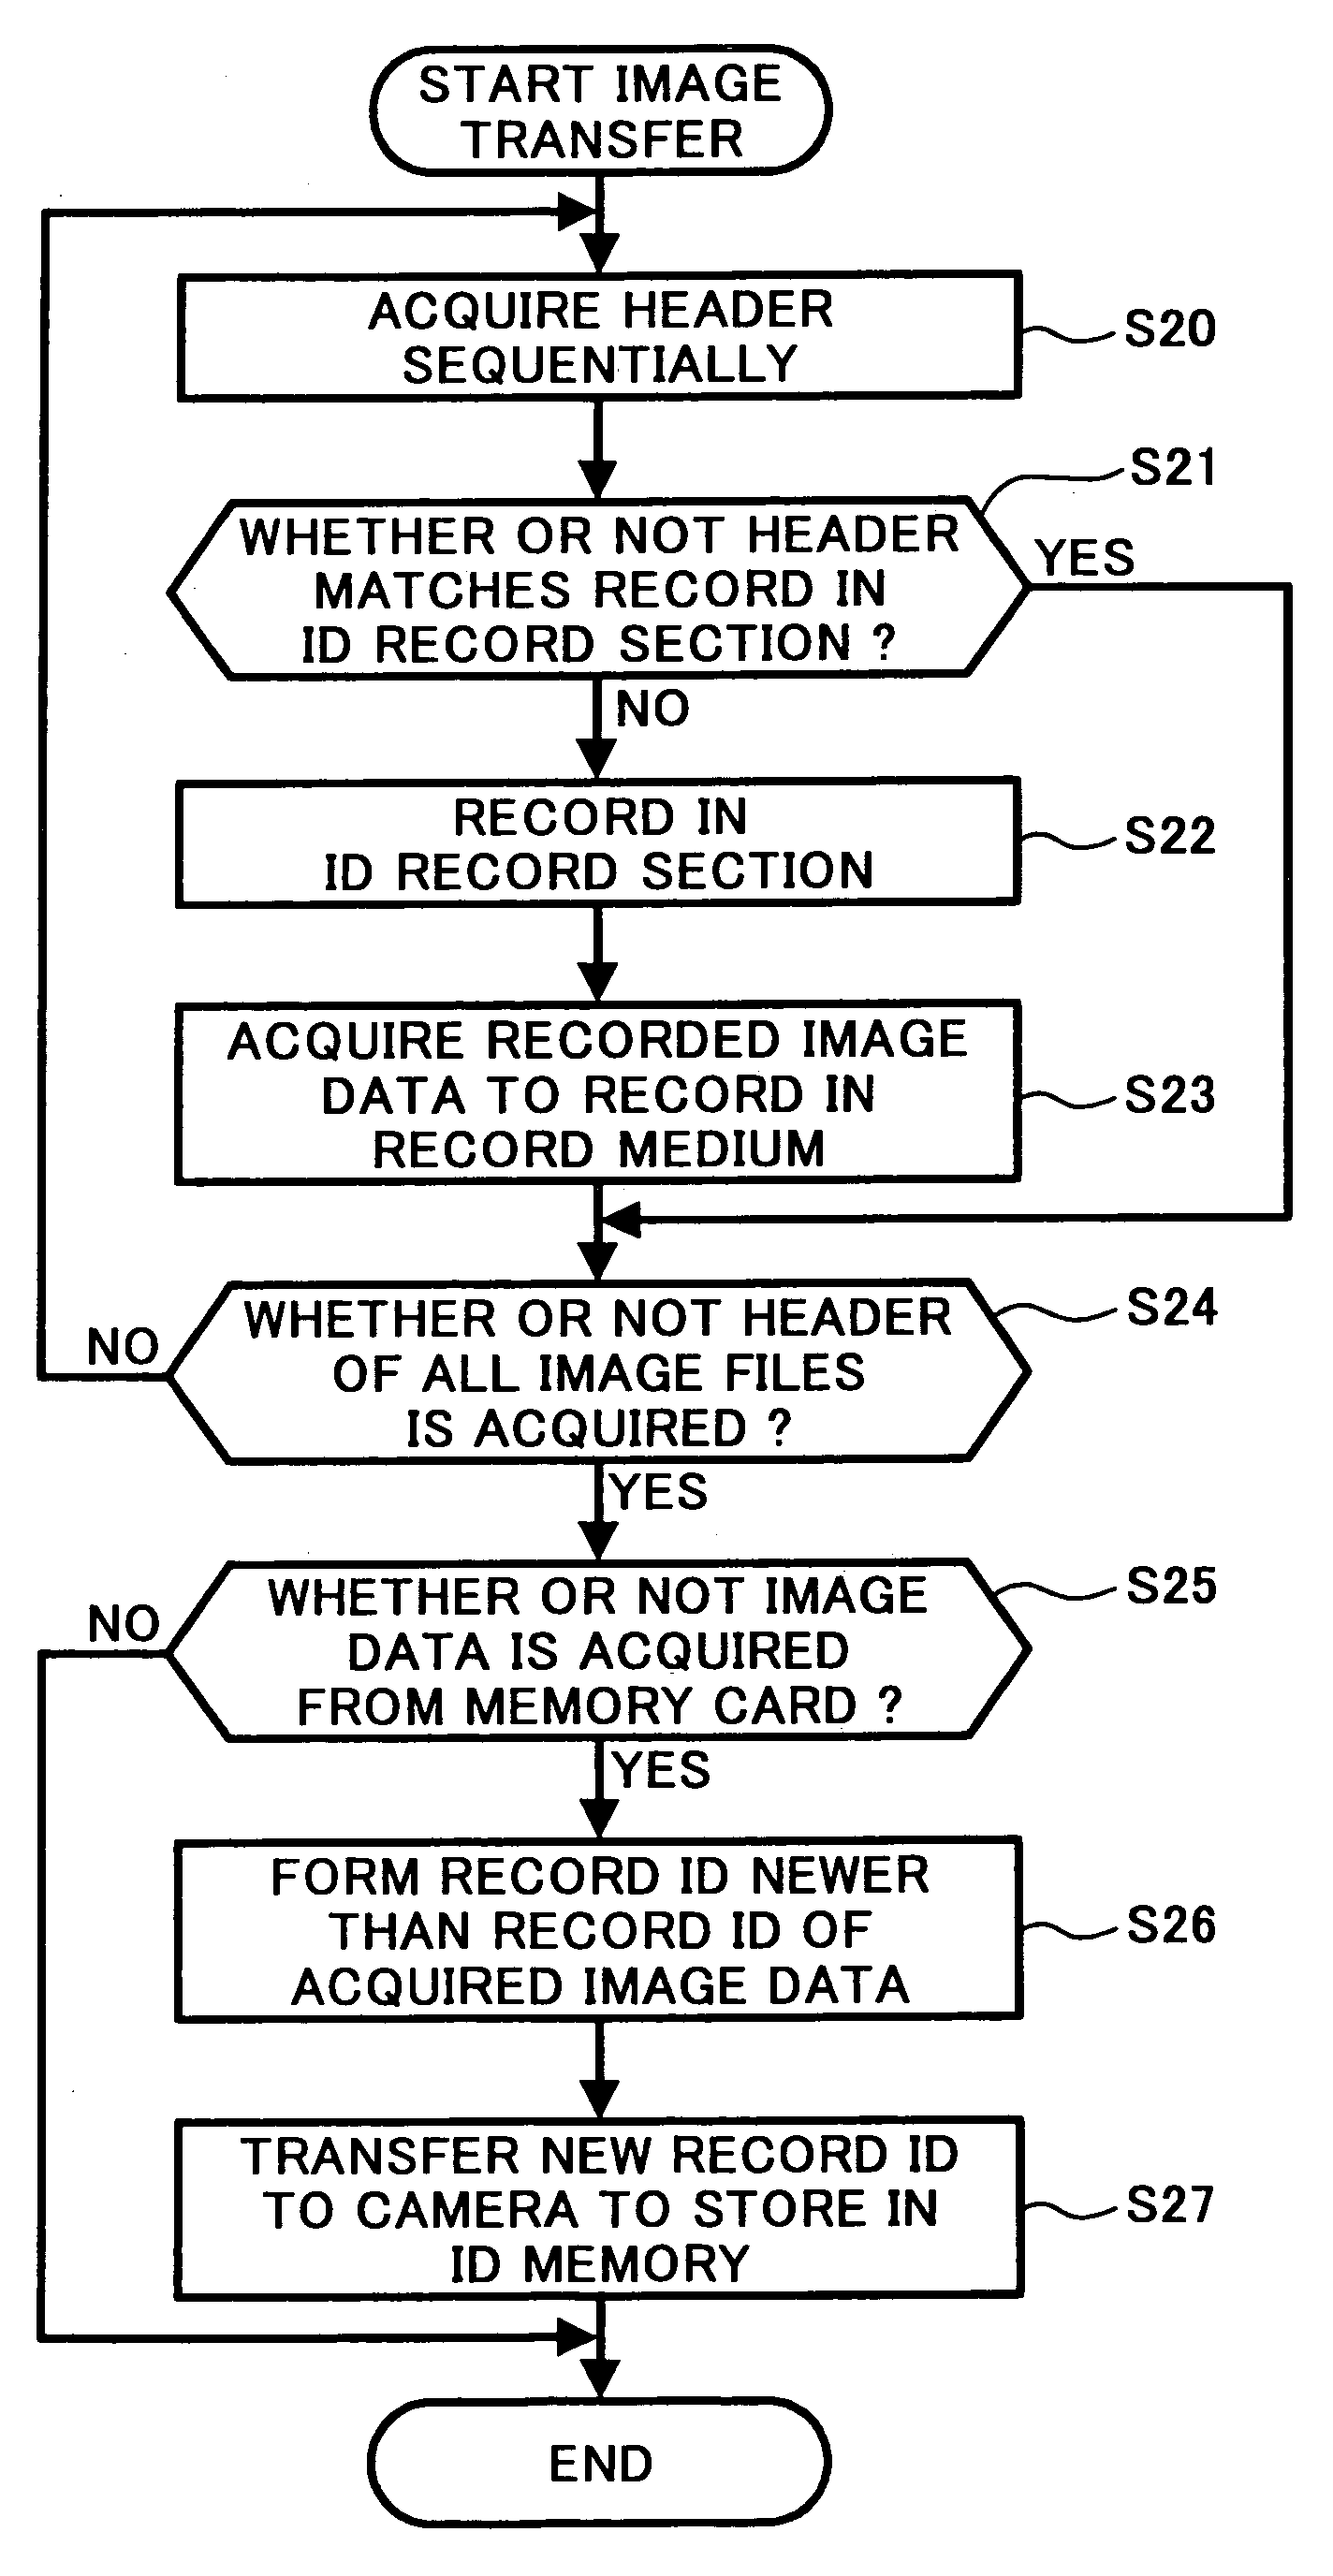 Control system for image file